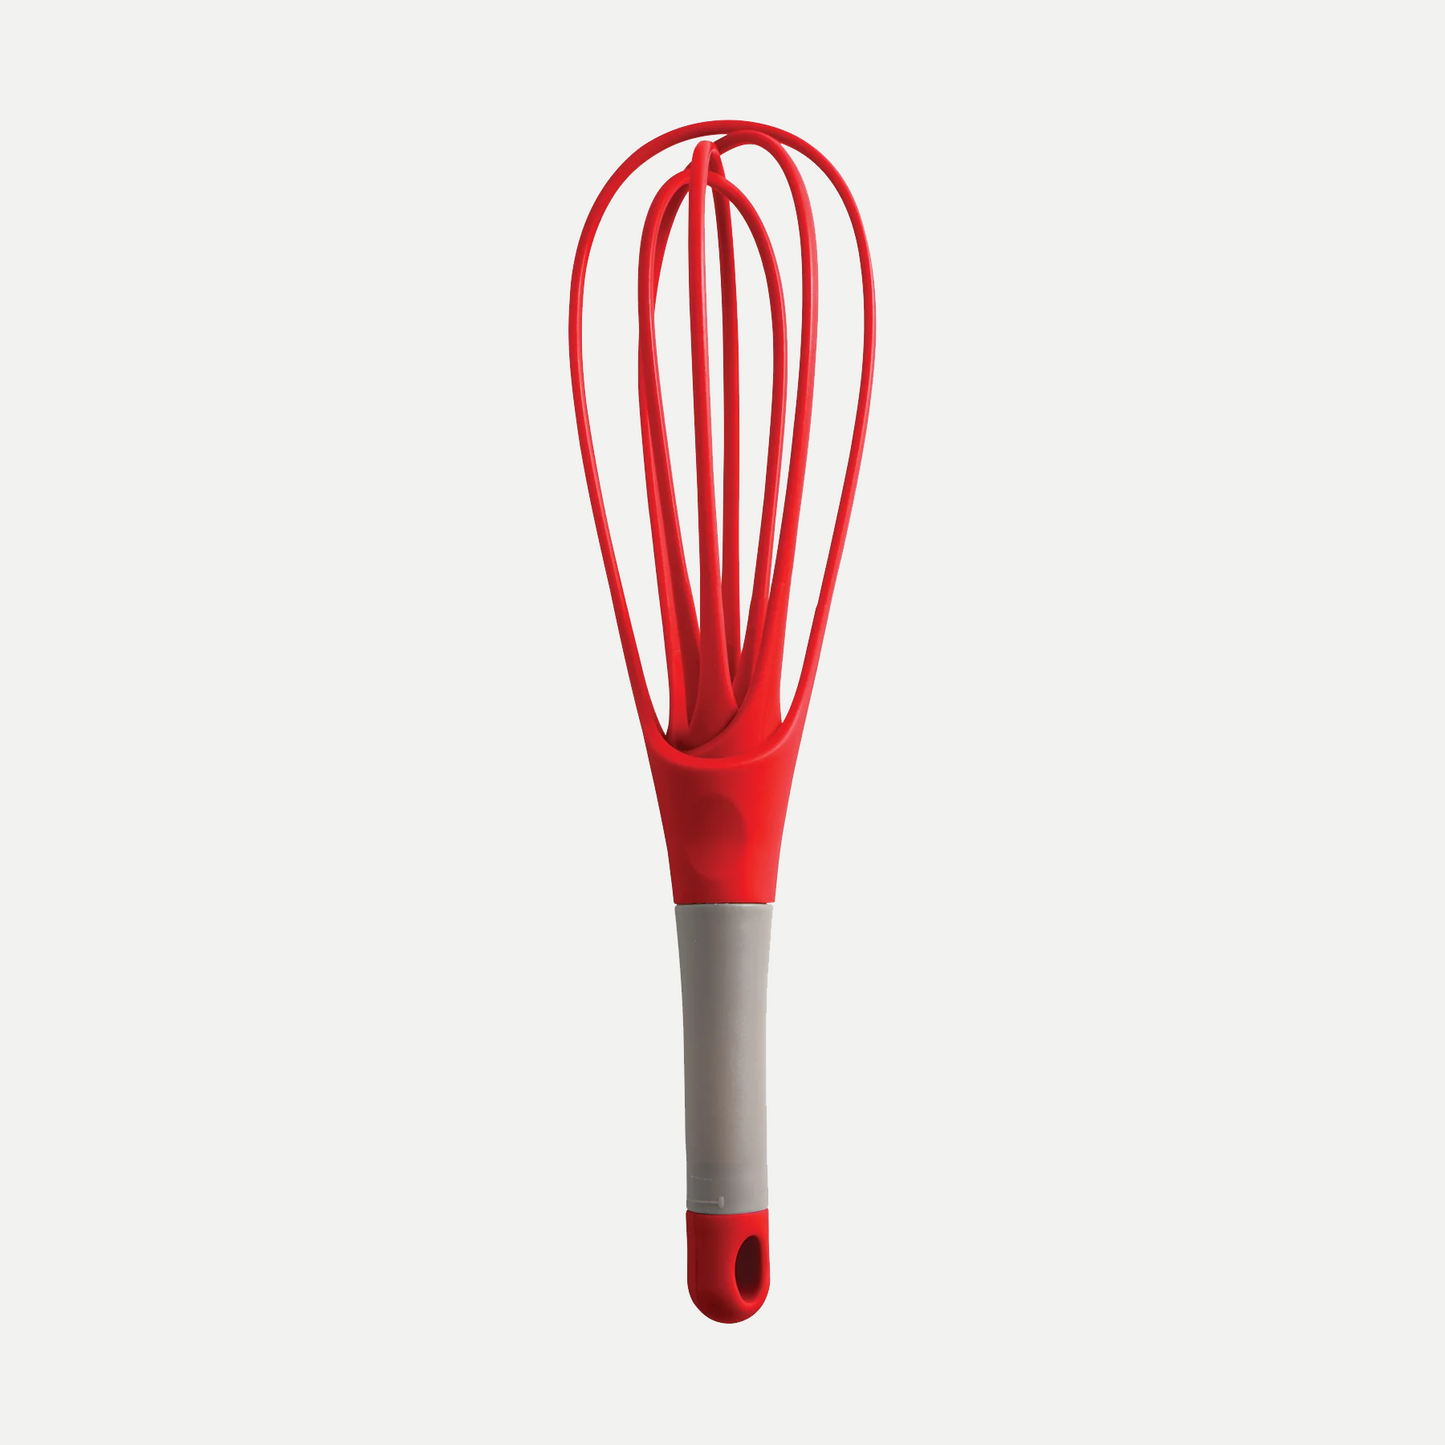 Collapsible Whisk - Official AEB Company Store at the Finer Line